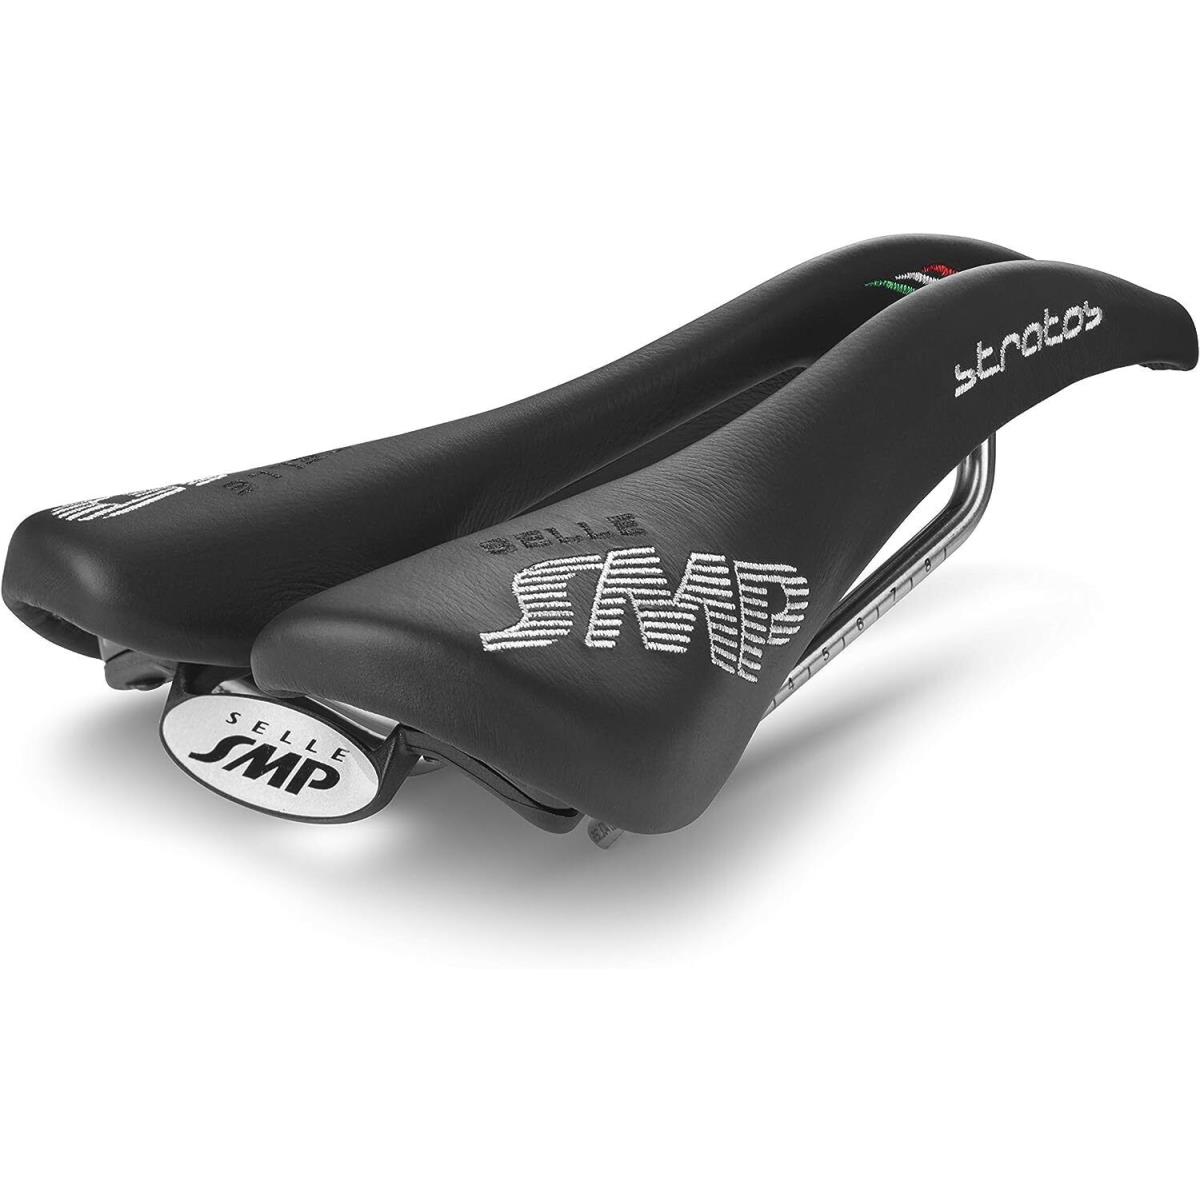 Selle Smp Stratos Saddle Selle Black High Quality Material Leather Italy